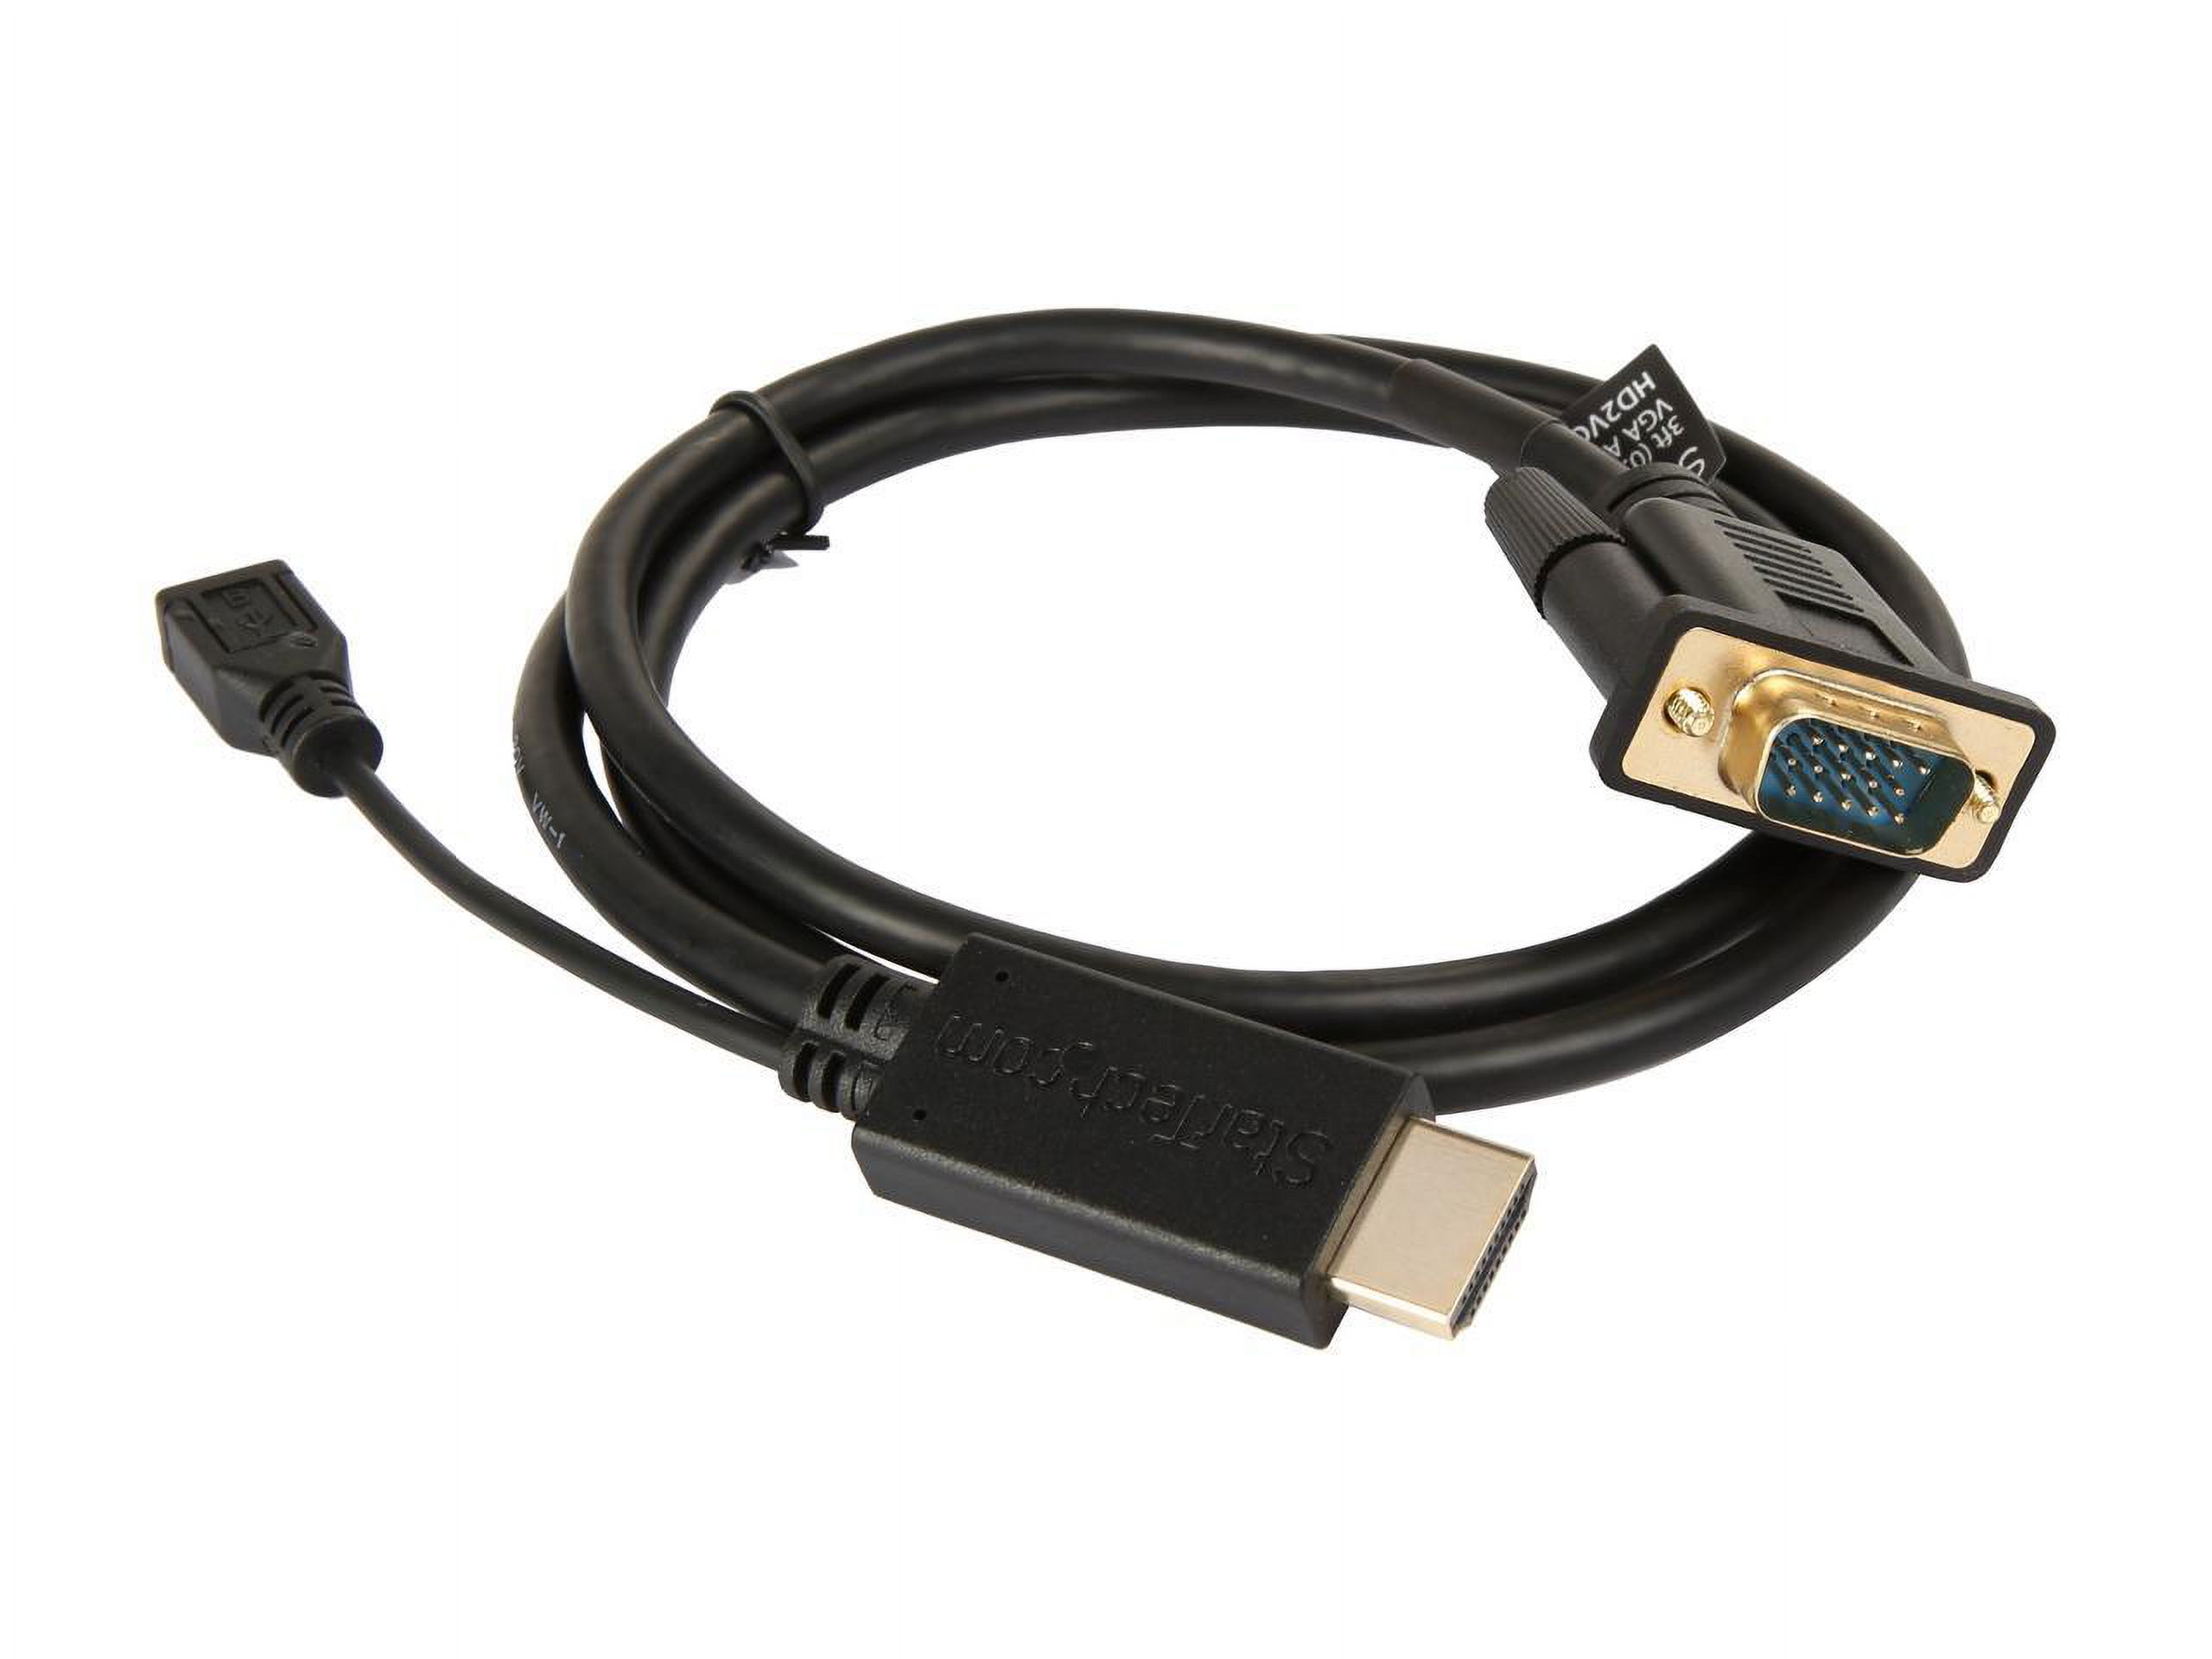 StarTech HD2VGAMM3 HDMI to VGA Cable - 3 ft. / 1m - 1080p - 1920 x 1200  - Active HDMI Cable - Monitor Cable - Computer Cable - image 2 of 3